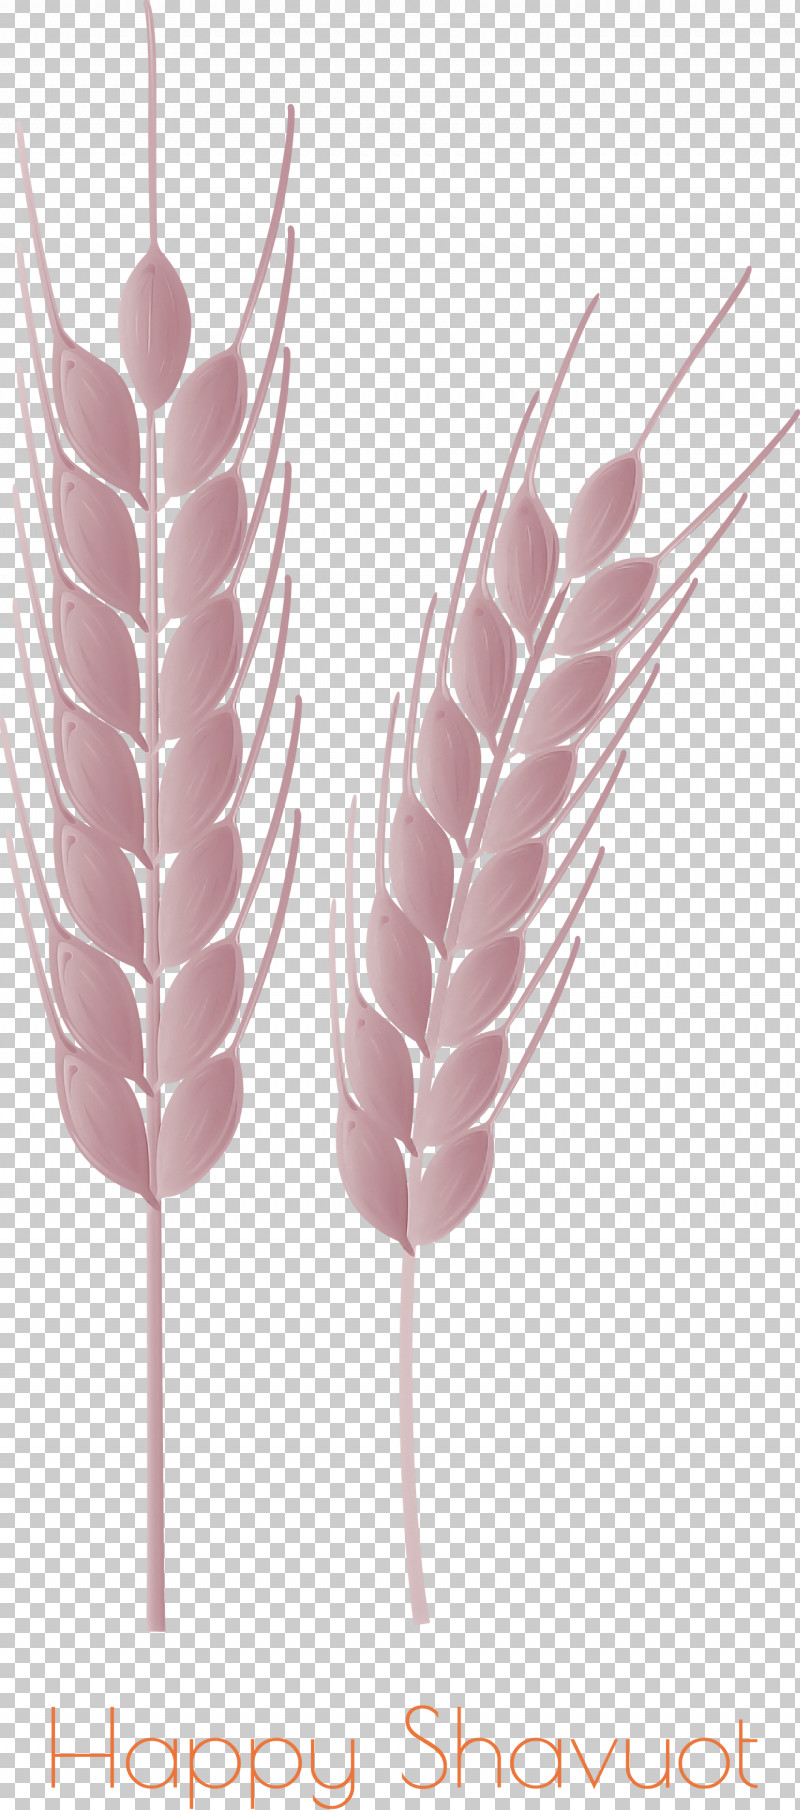 Happy Shavuot Shavuot Shovuos PNG, Clipart, Feather, Food Grain, Grass Family, Happy Shavuot, Pink Free PNG Download